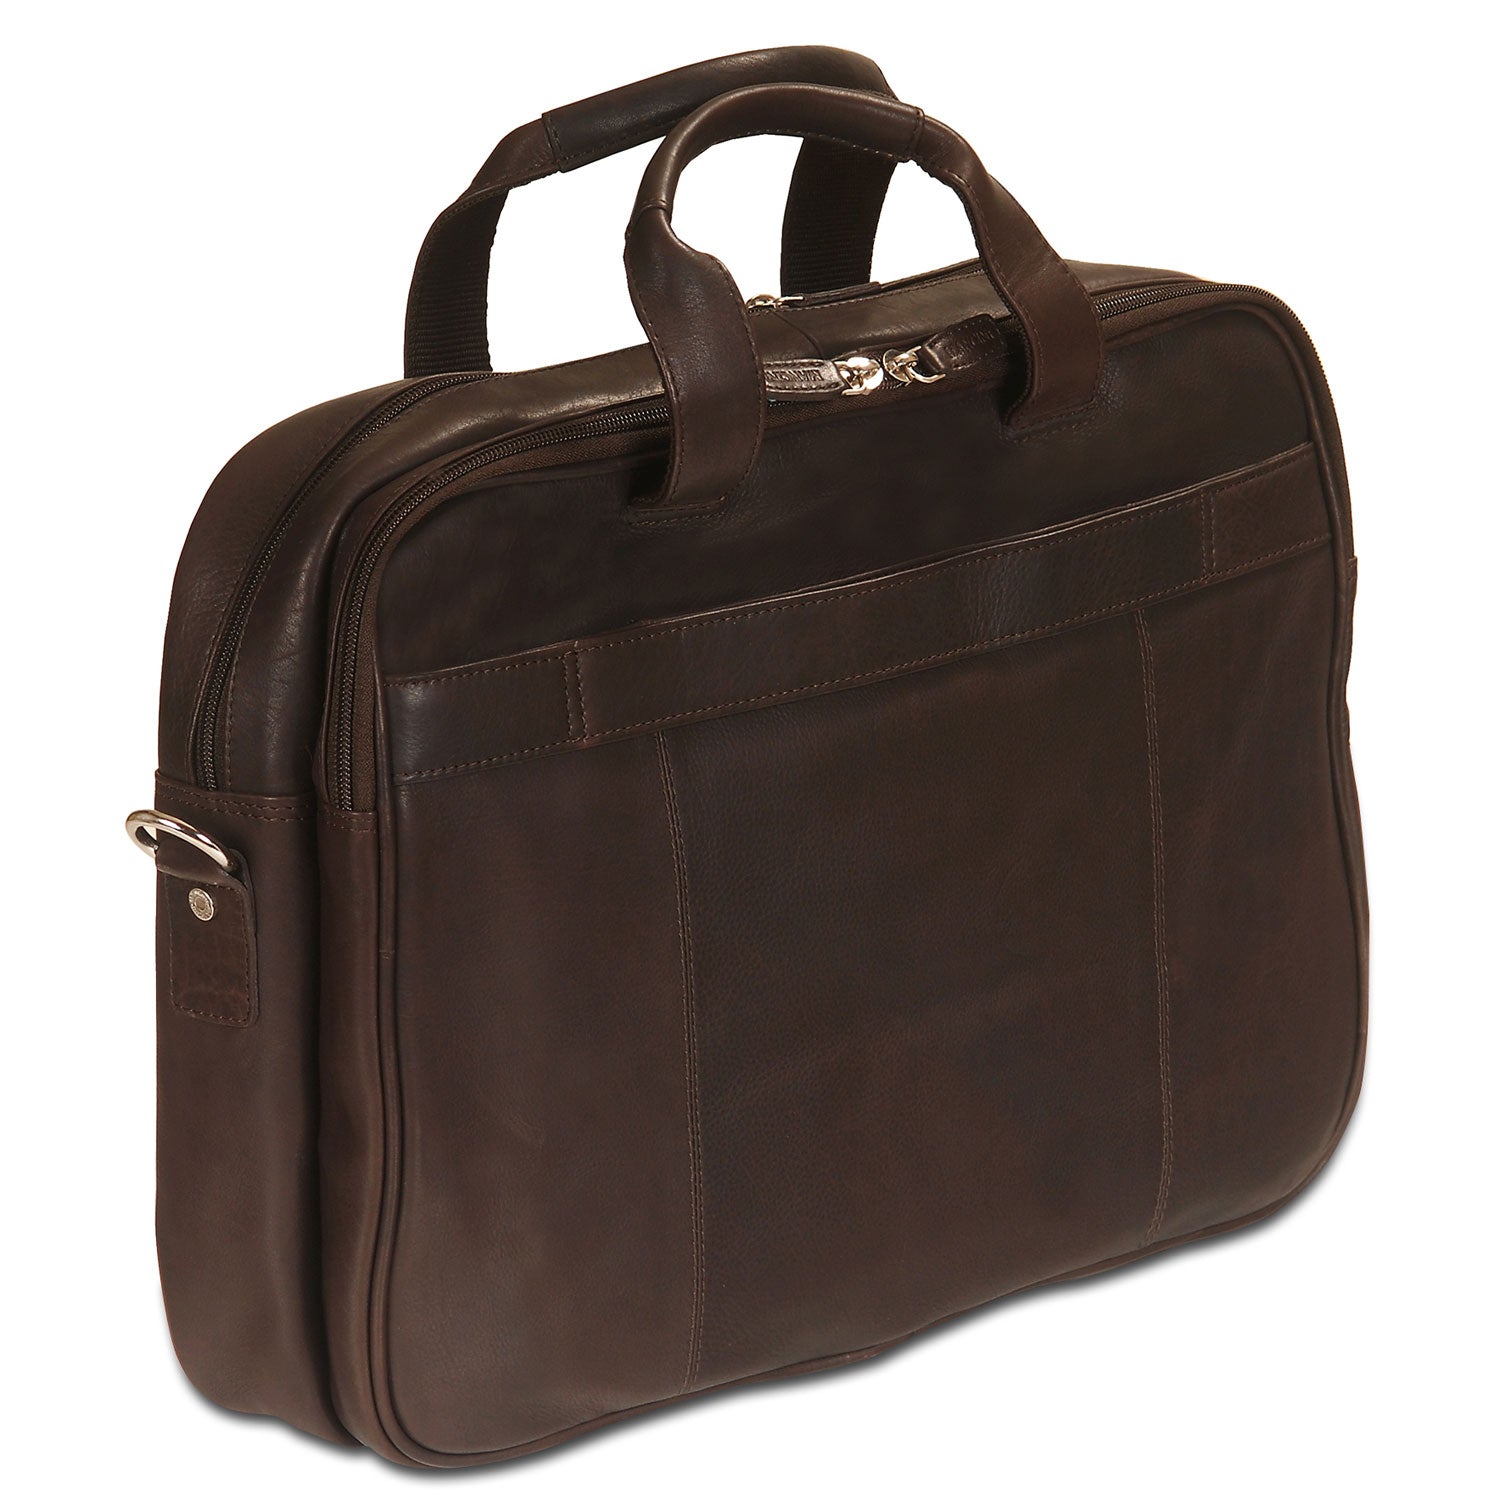 Mancini Leather Zippered Double Compartment for 15.6" Laptop / Tablet, 15.75" x 4.25" x 11.5", Brown